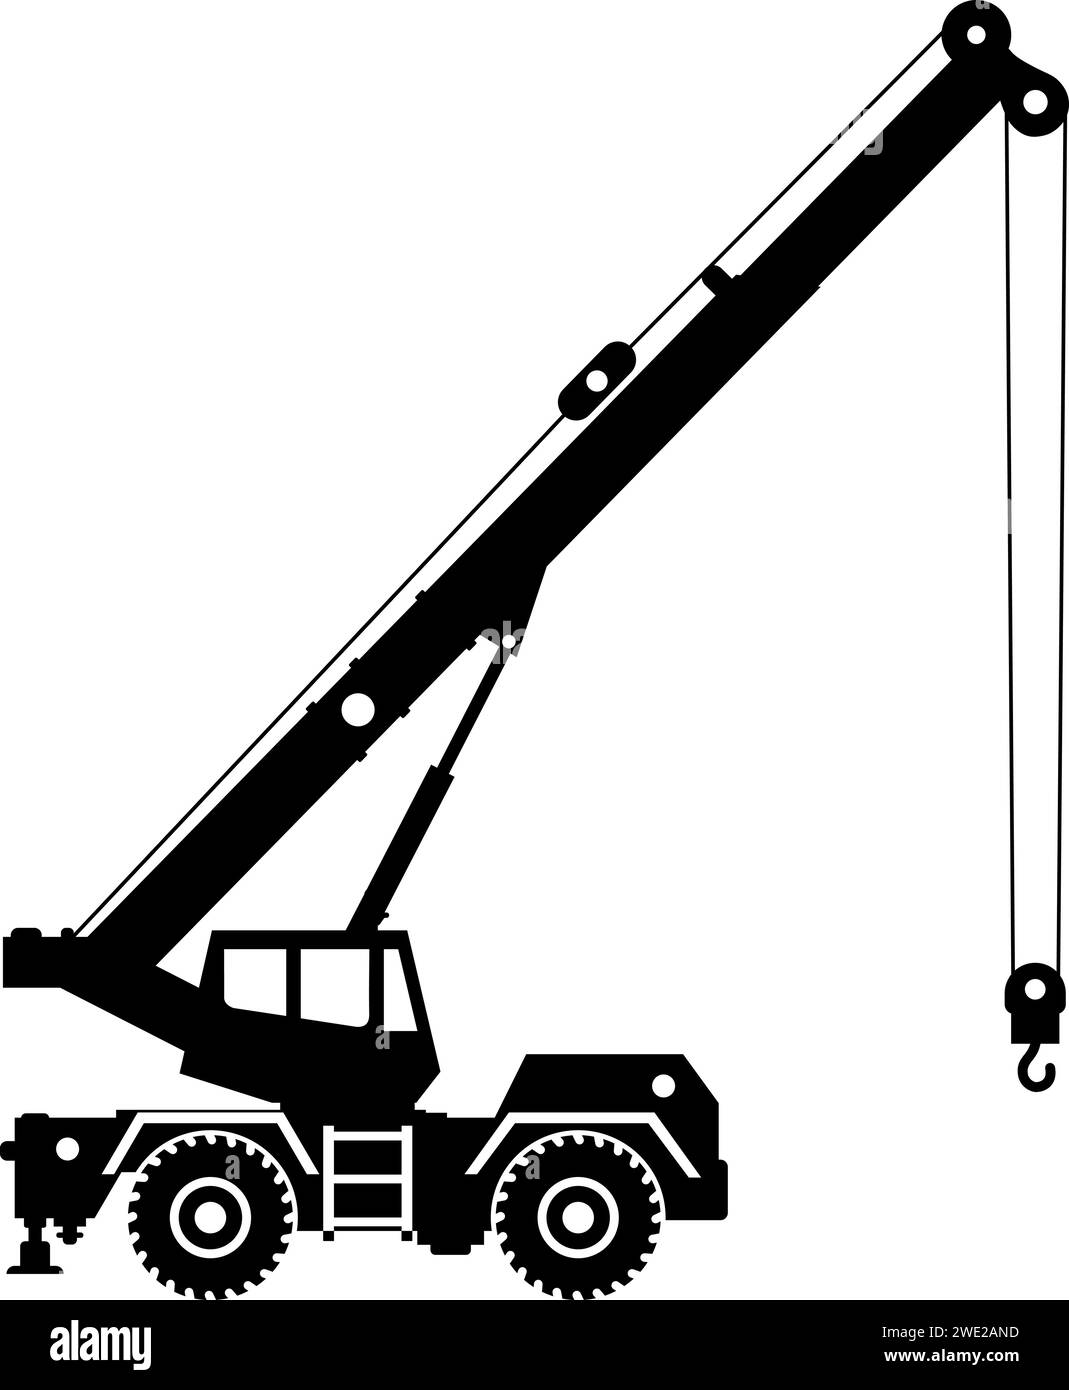 Silhouette of Mobile Crane Icon in Flat Style. Stock Vector